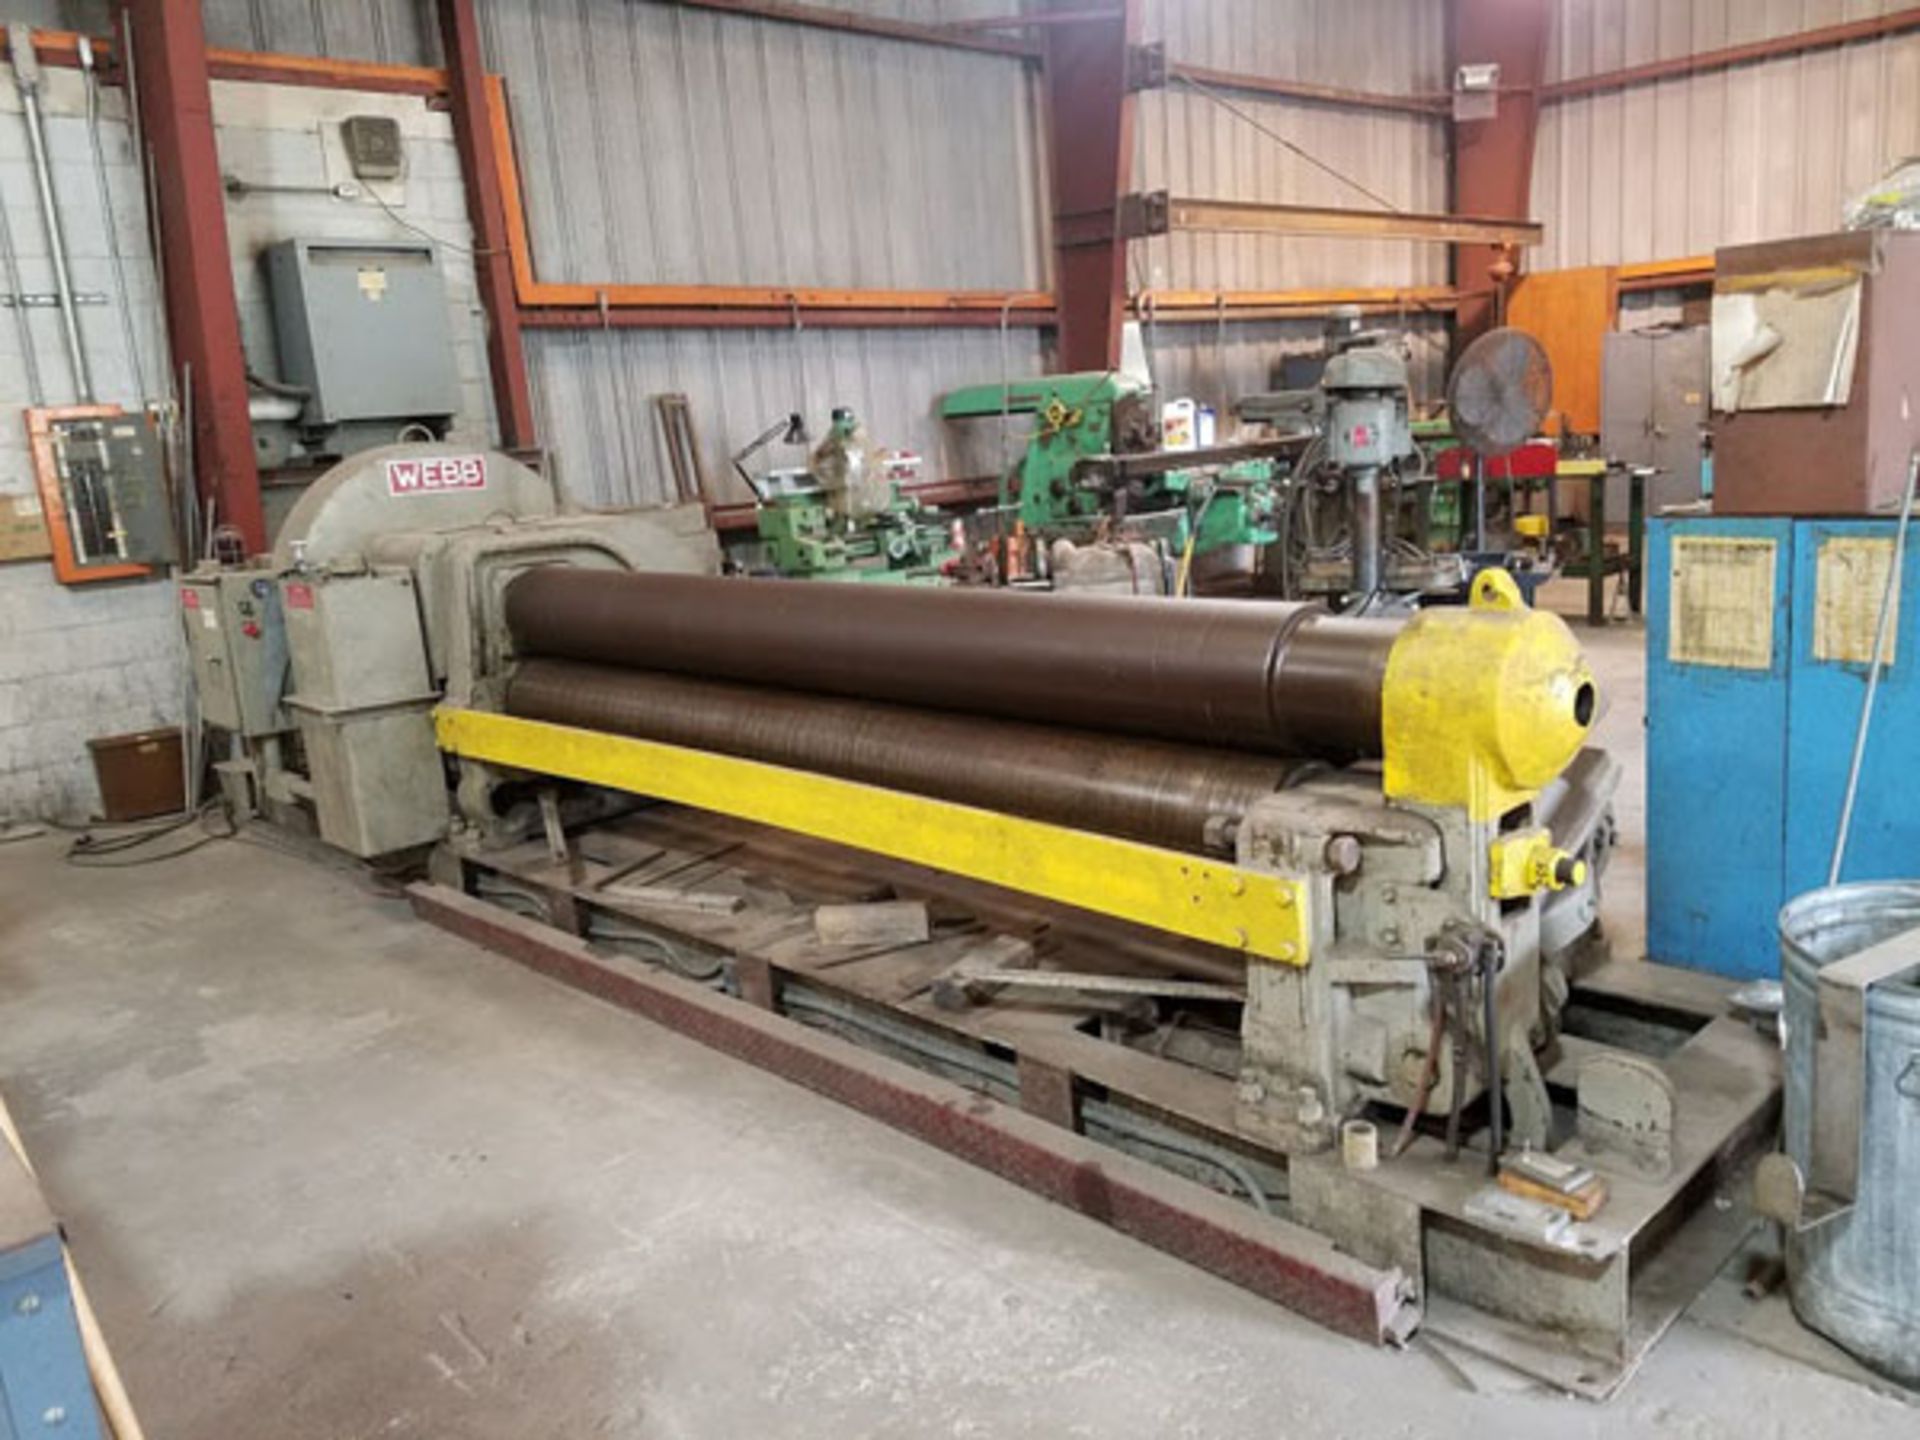 Webb Initial Pinch Power Roll 1/2" x 10', Located In Painesville, OH - 8785P